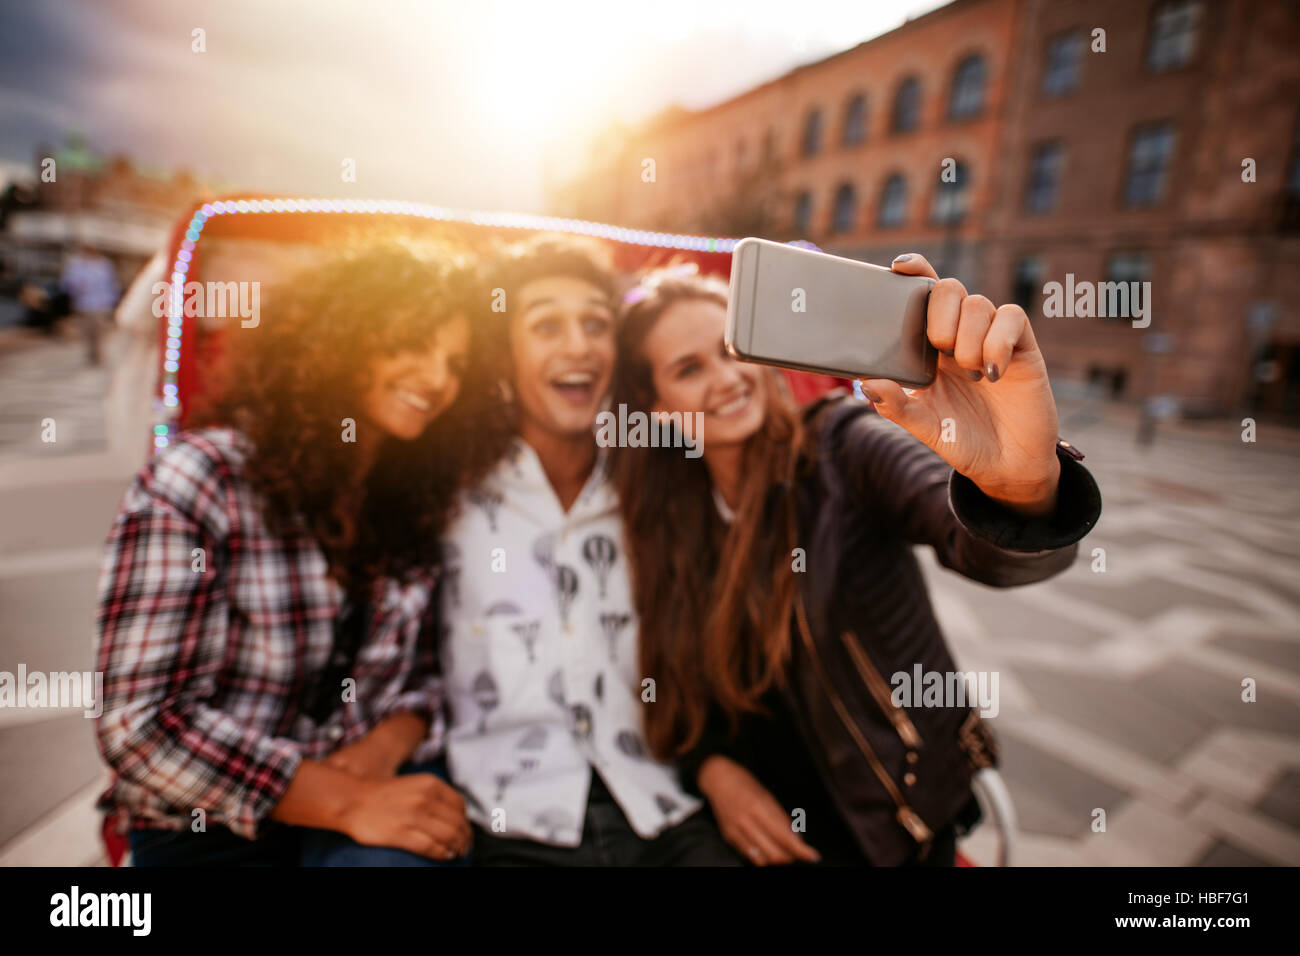 Three young friends taking selfie on tricycle ride. Group of people riding on tricycle bike and taking self portrait. Focus on mobile phone in female Stock Photo